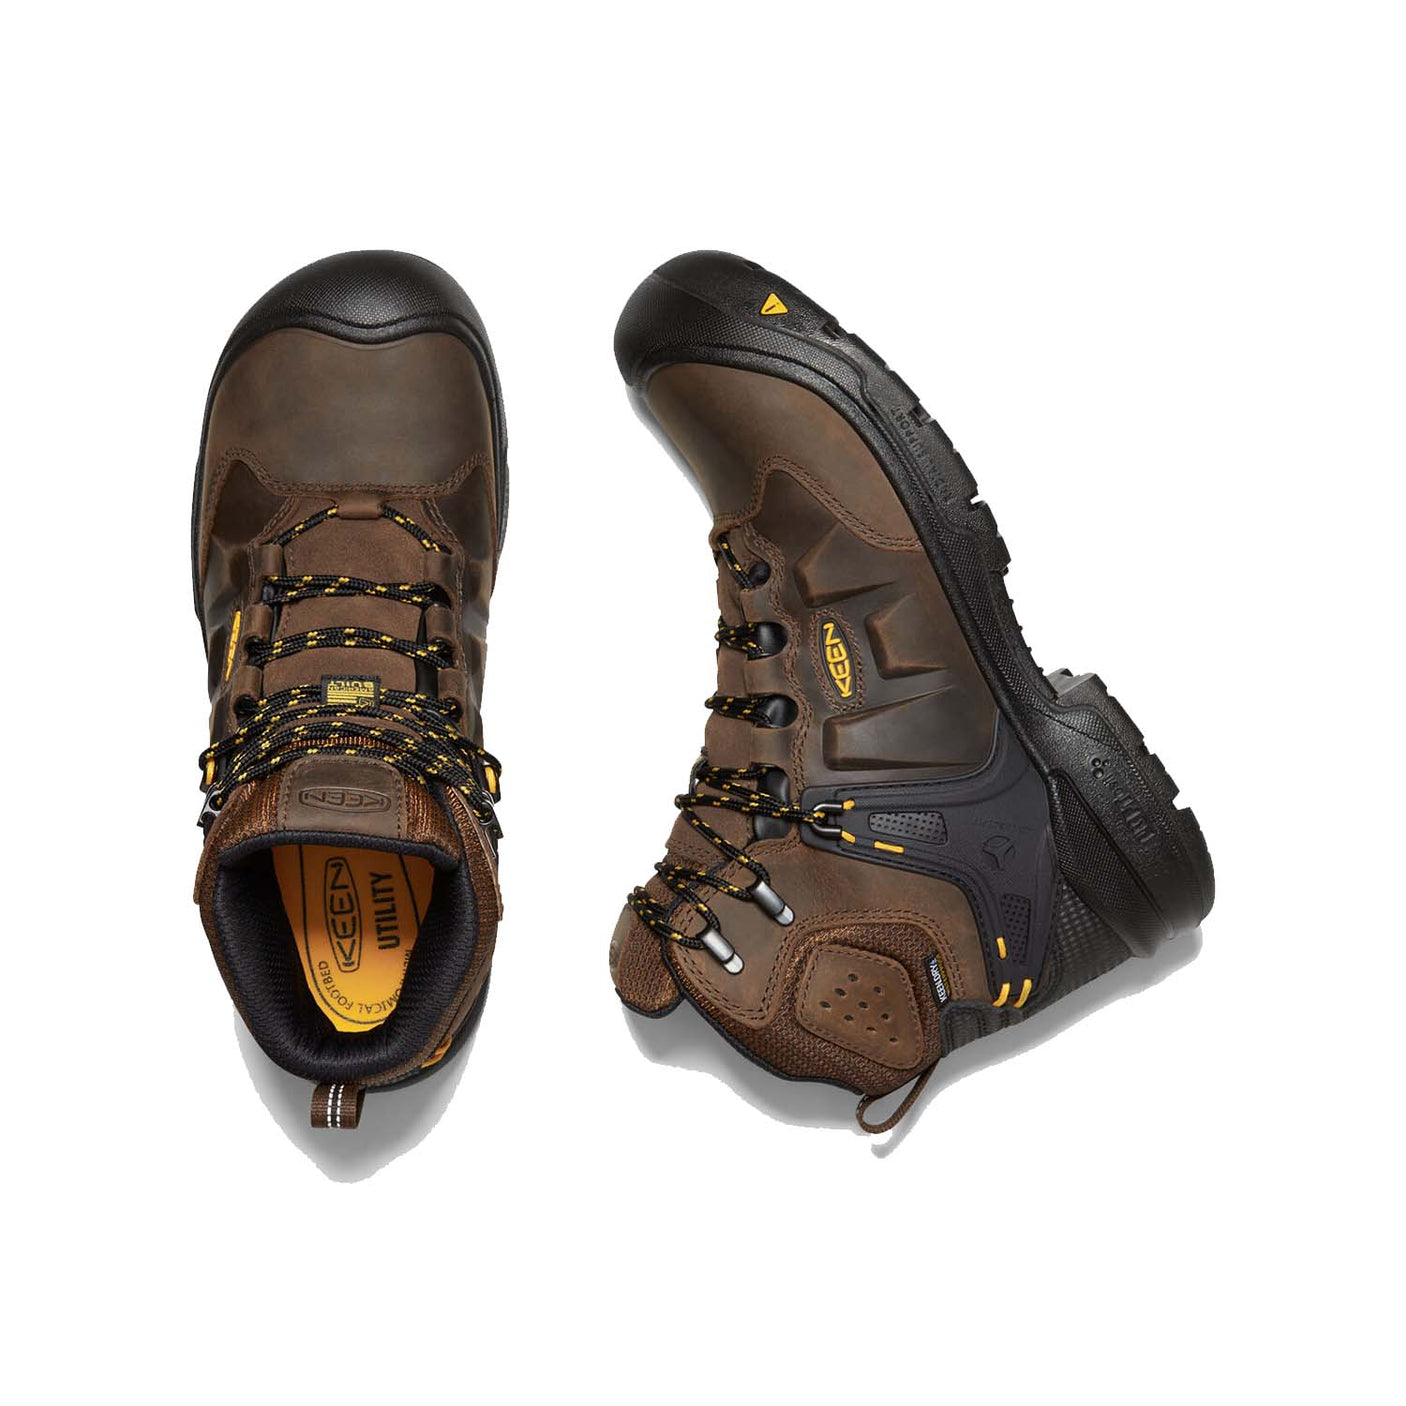 Keen Dover 6" Comp-Toe Boots 1021467-3